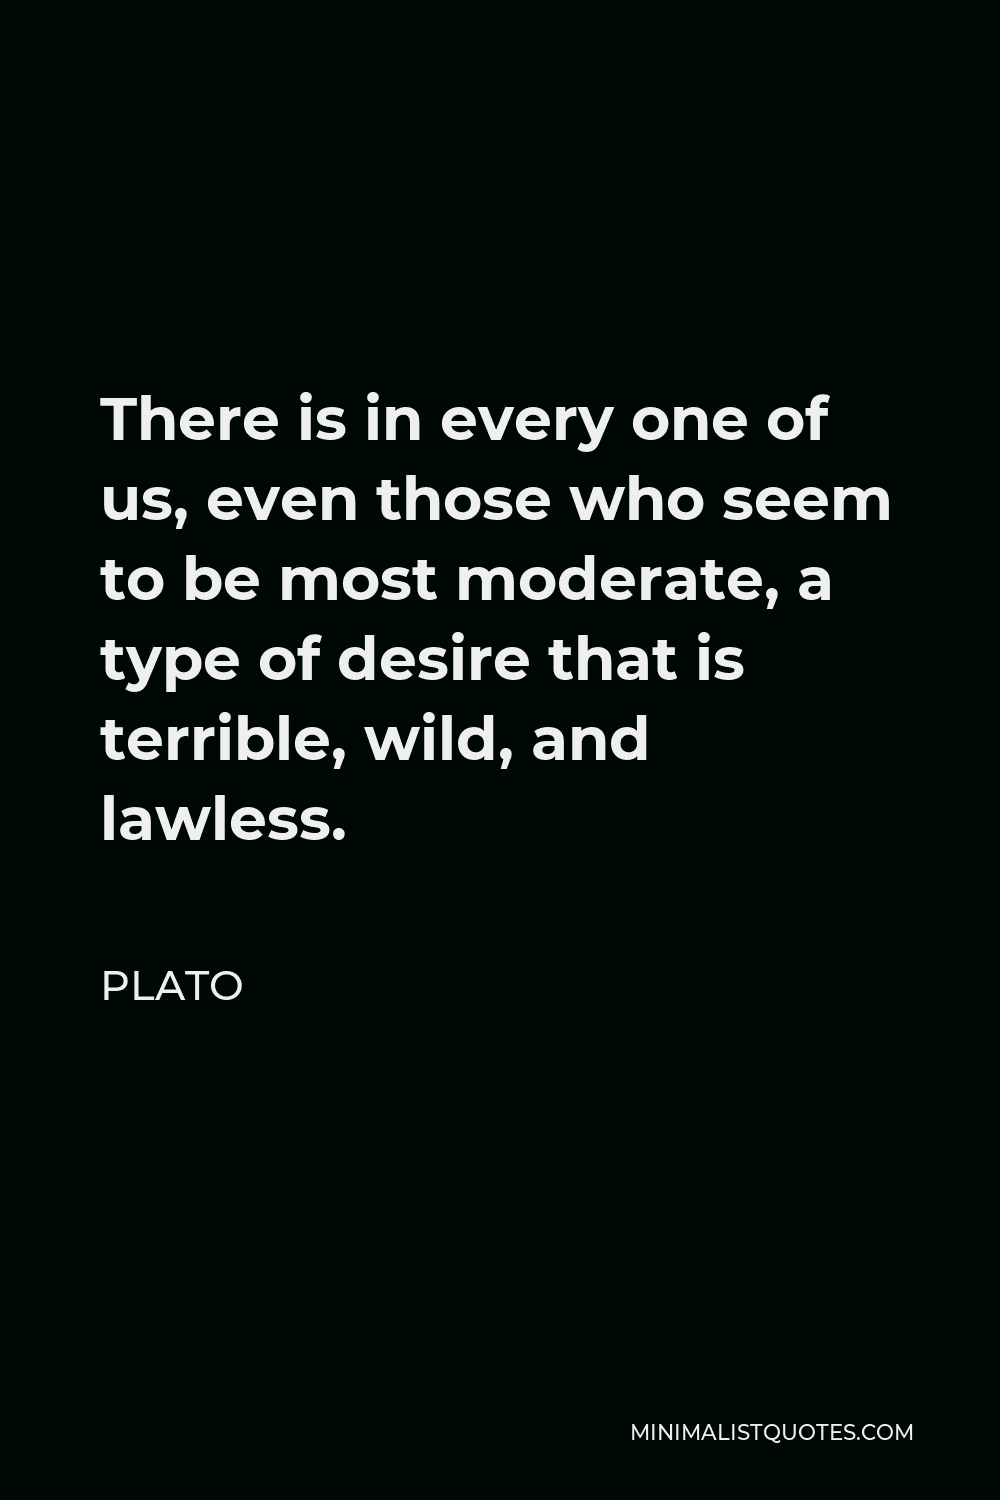 Plato Quote - There is in every one of us, even those who seem to be most moderate, a type of desire that is terrible, wild, and lawless.